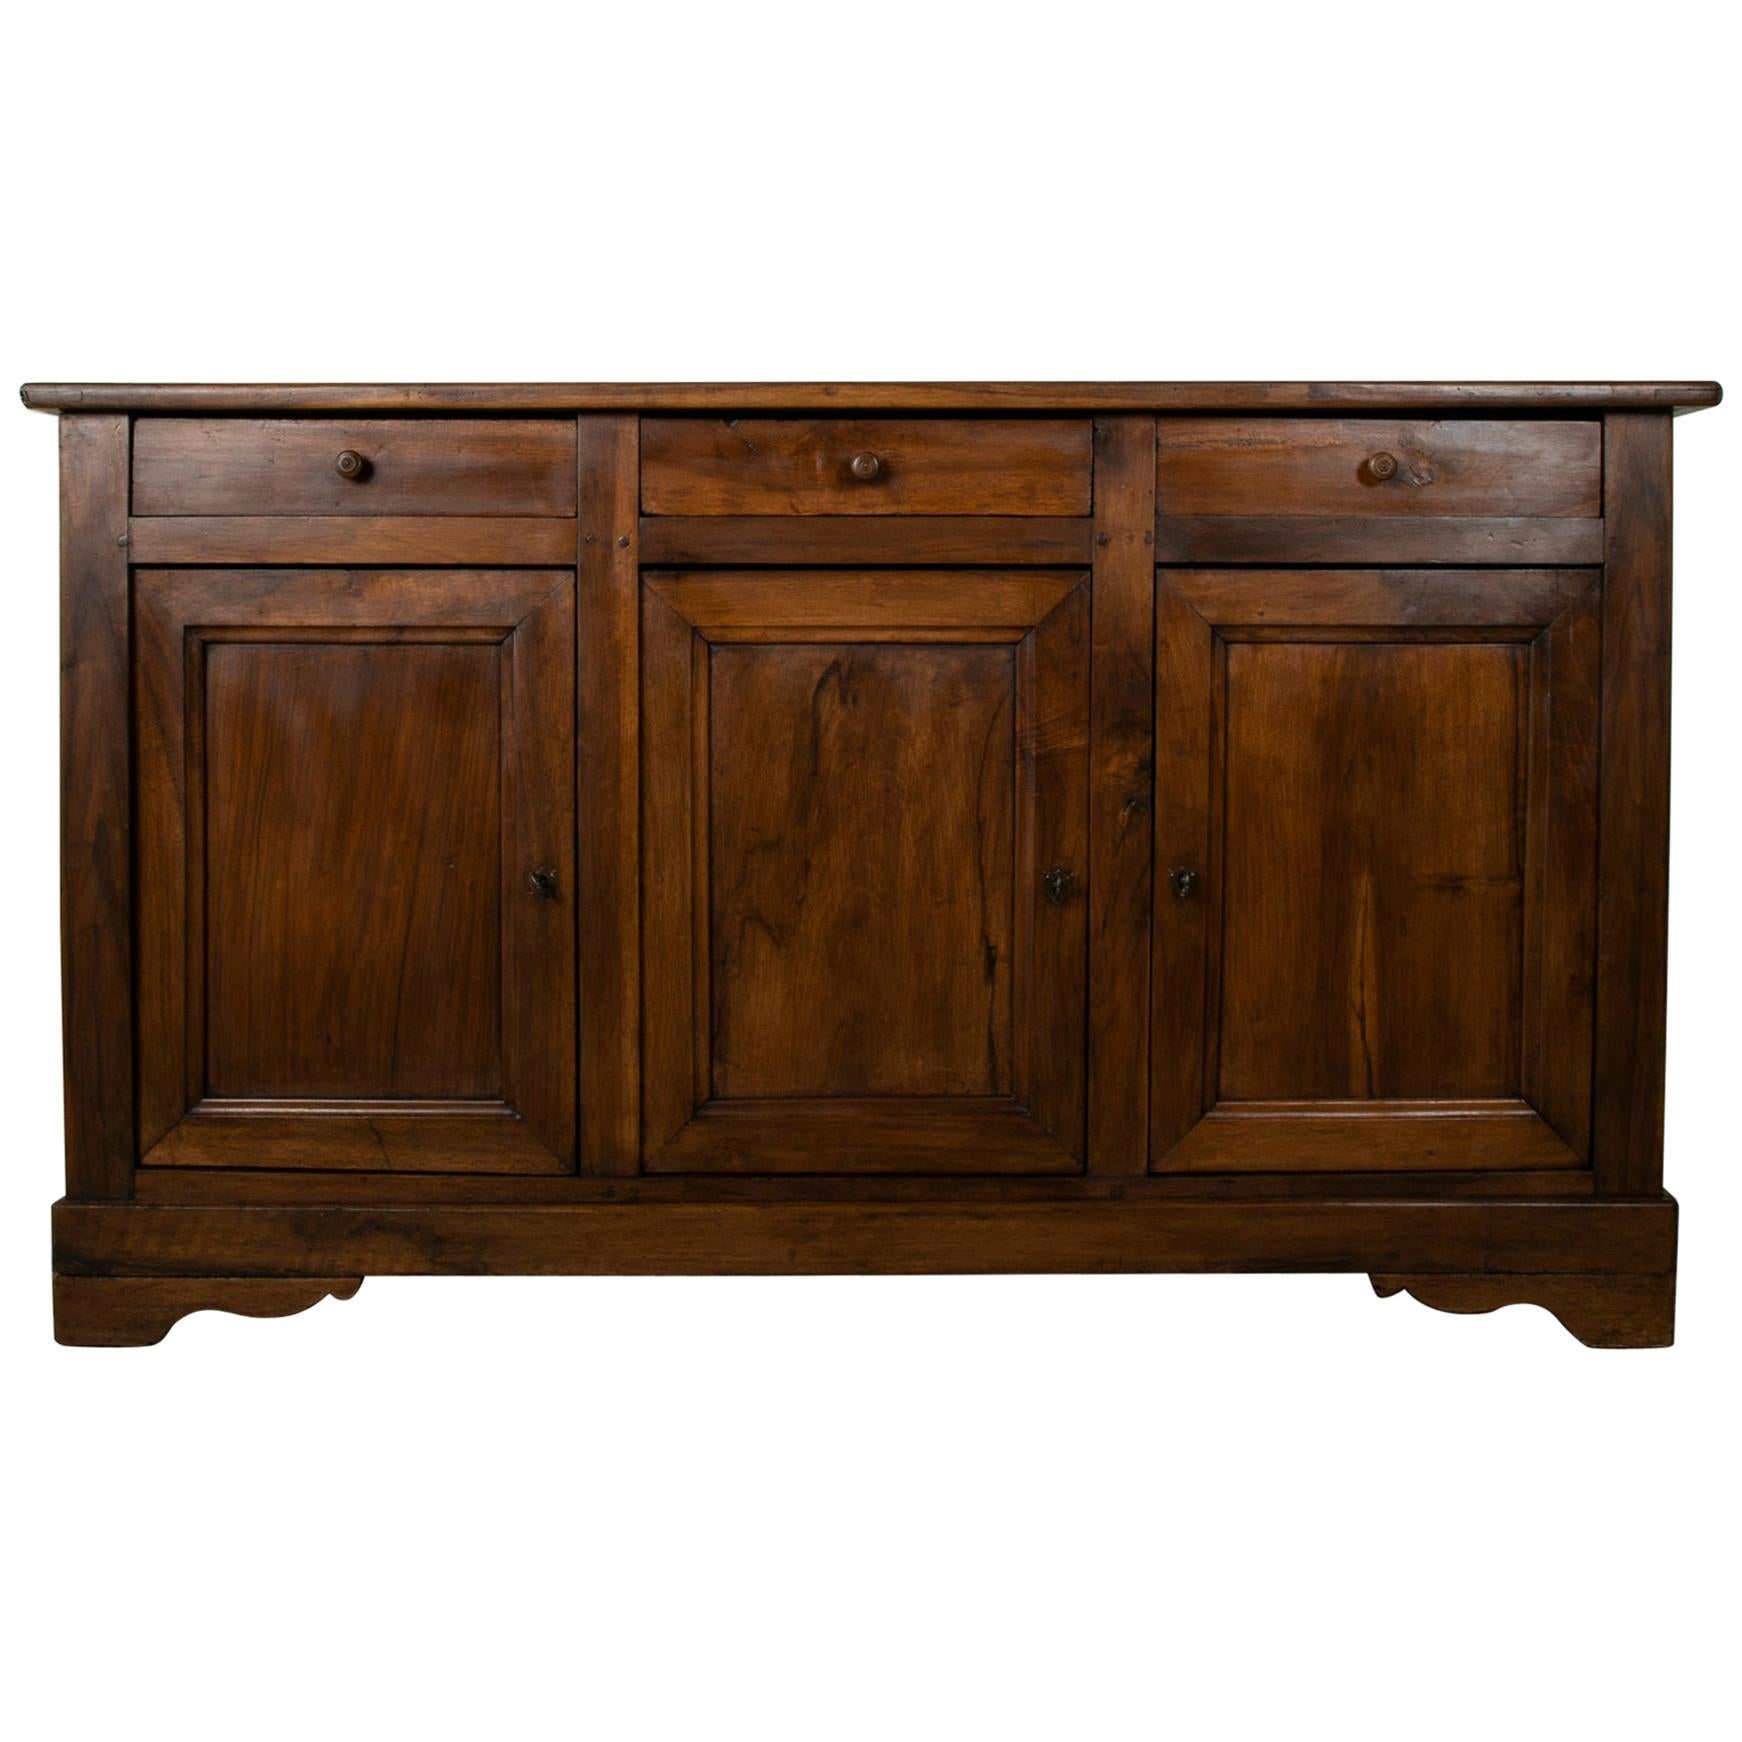 Early 20th Century French Louis Philippe Walnut Sideboard, Buffet, or Enfilade